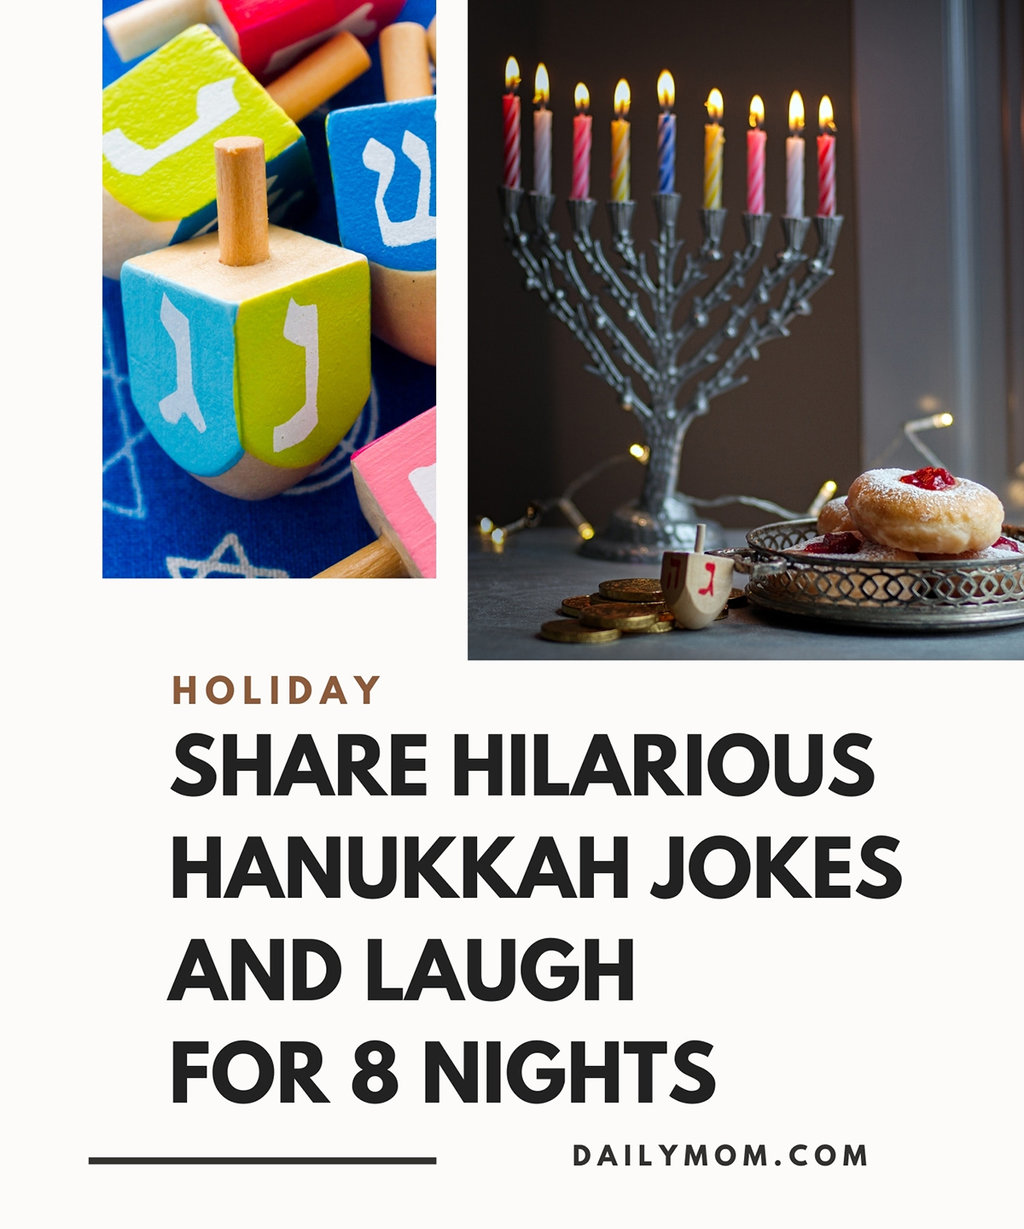 Hilarious Hanukkah Jokes To Fill 8 Nights With Laughter And Giggles